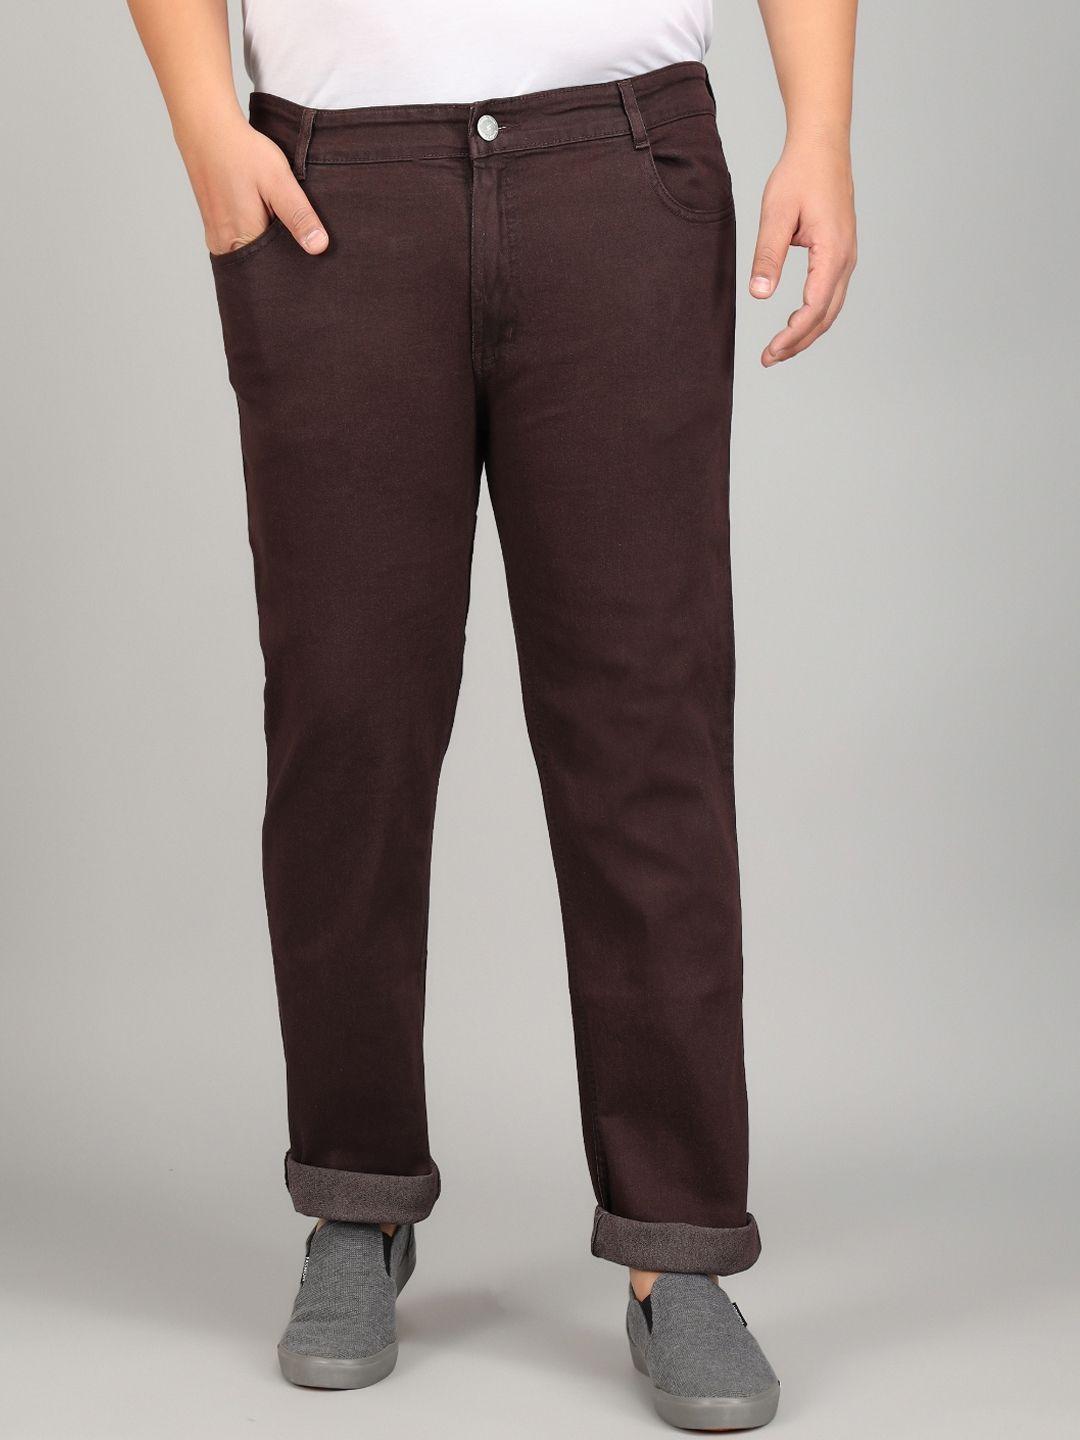 studio nexx men coffee brown relaxed fit stretchable jeans